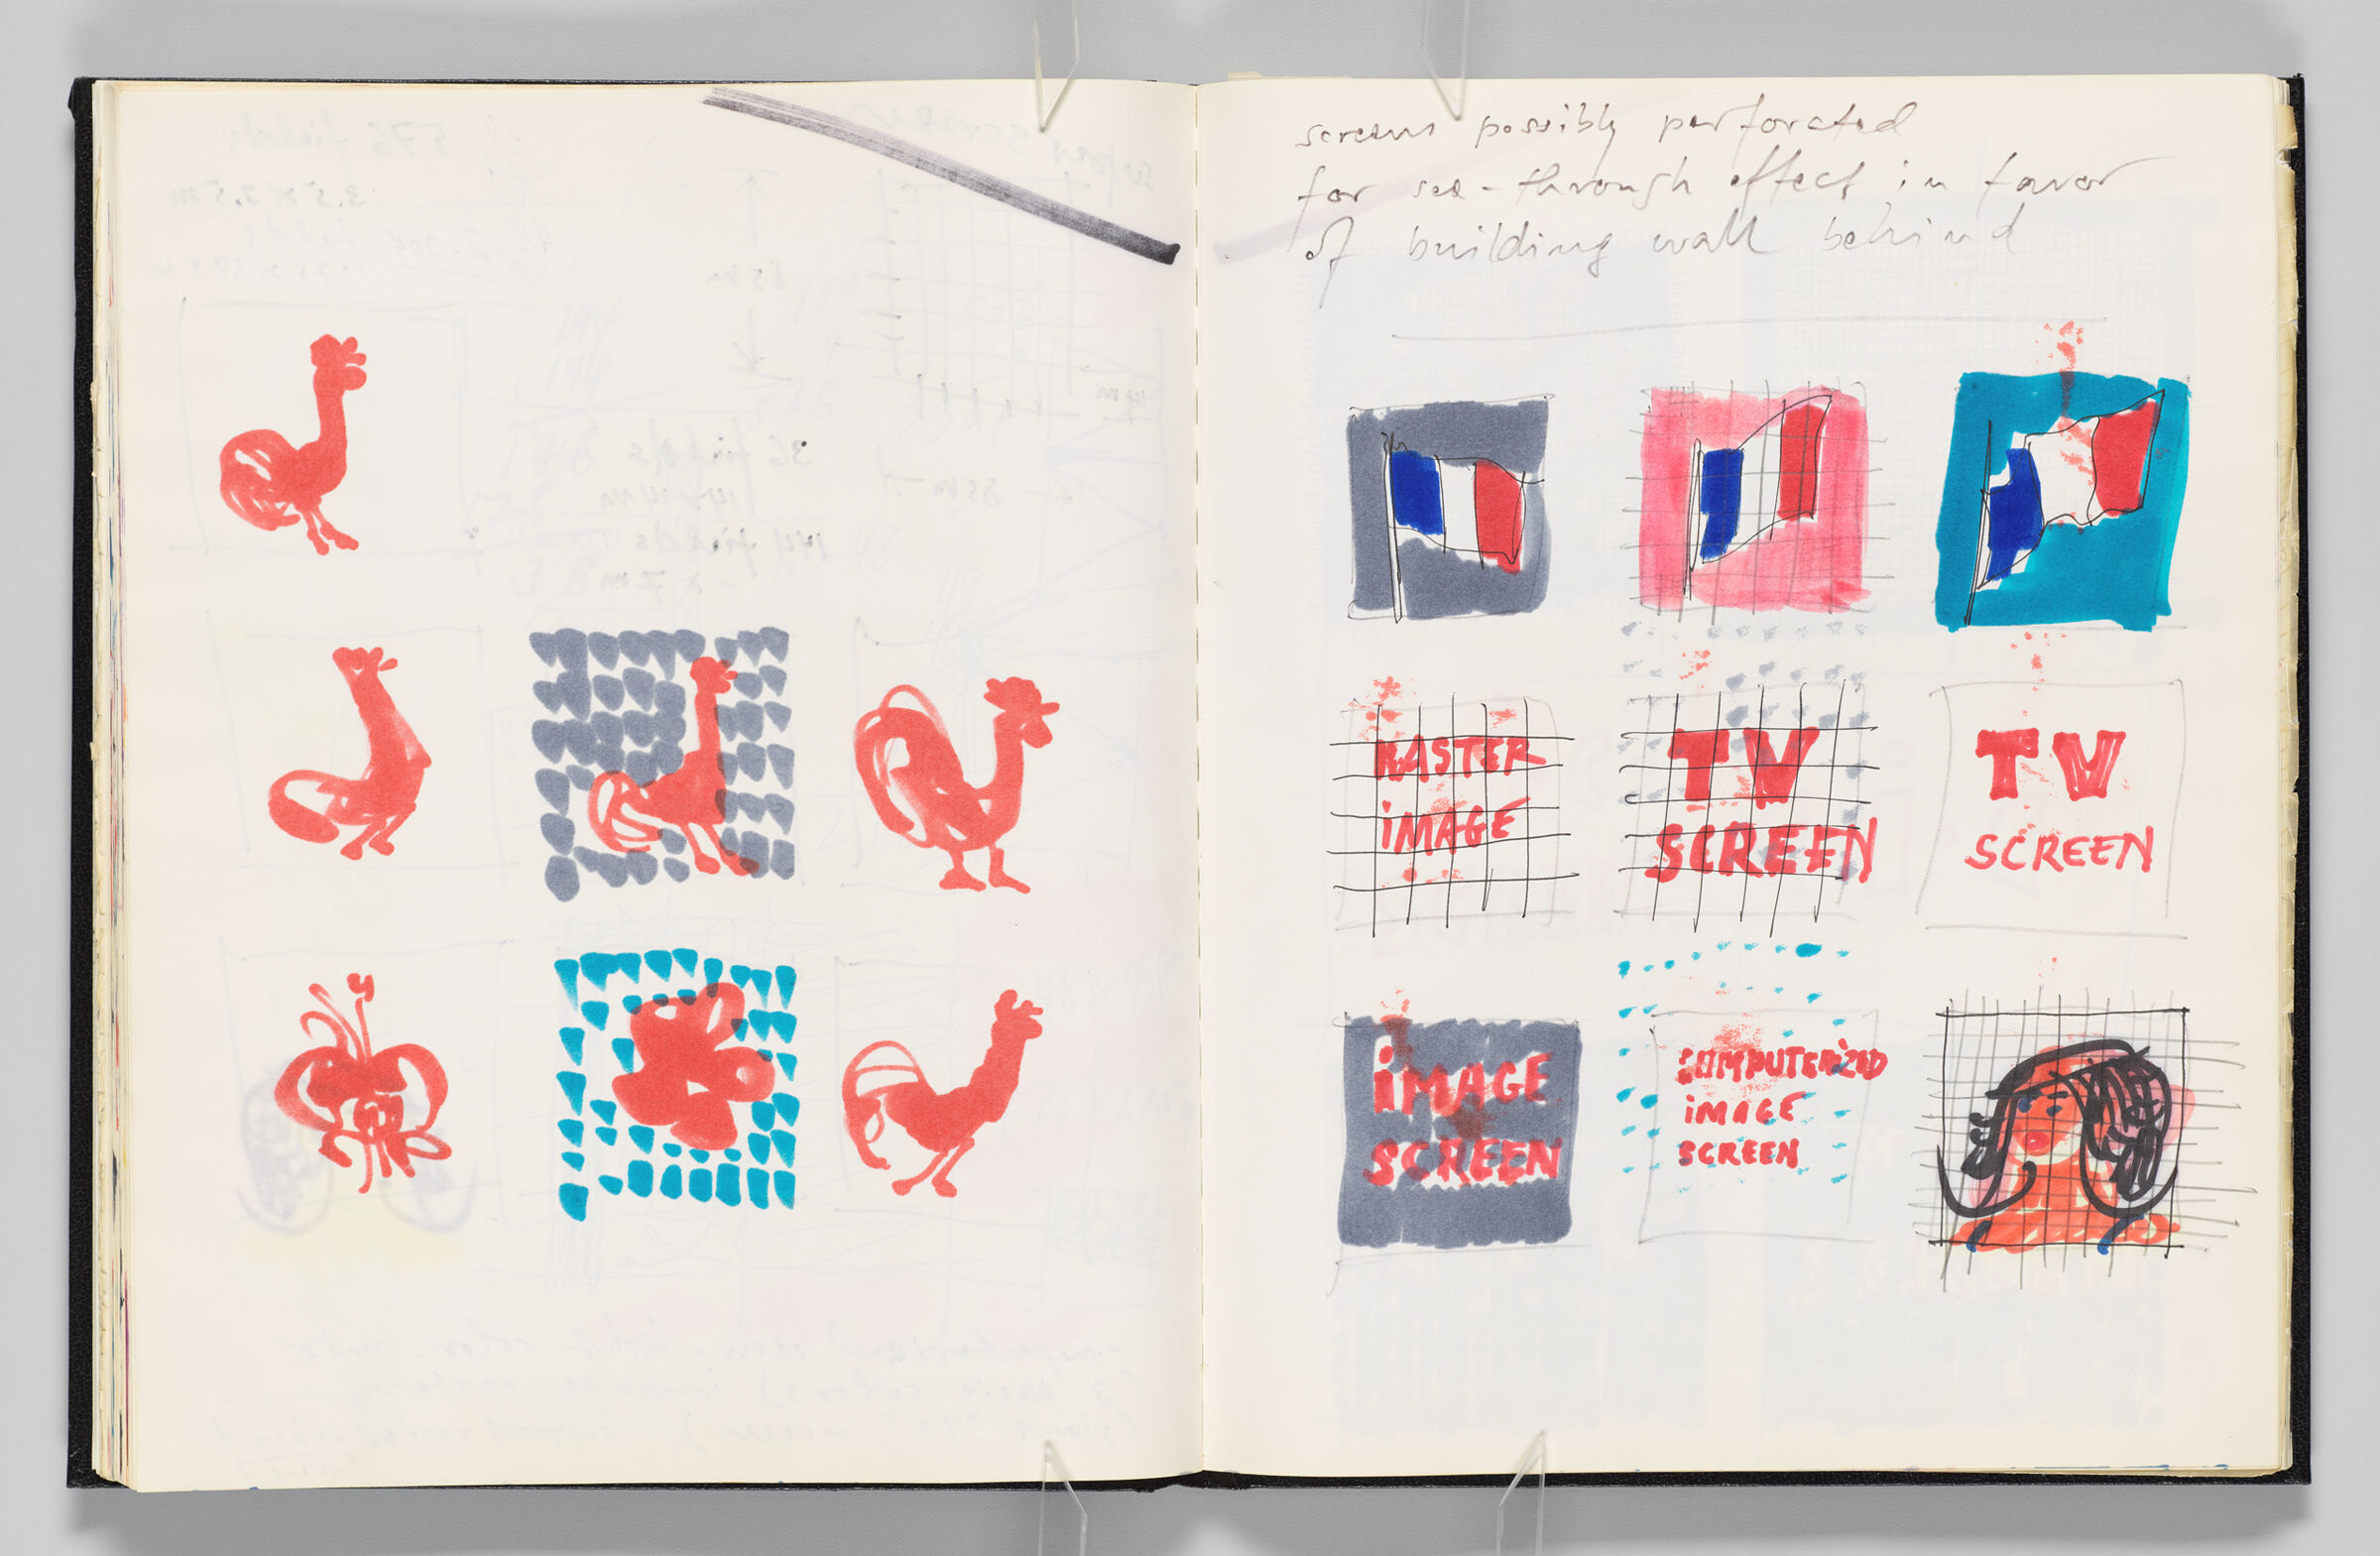 Untitled (Bleed-Through Of Previous Page, Left Page); Untitled (Designs For Screens, Right Page)